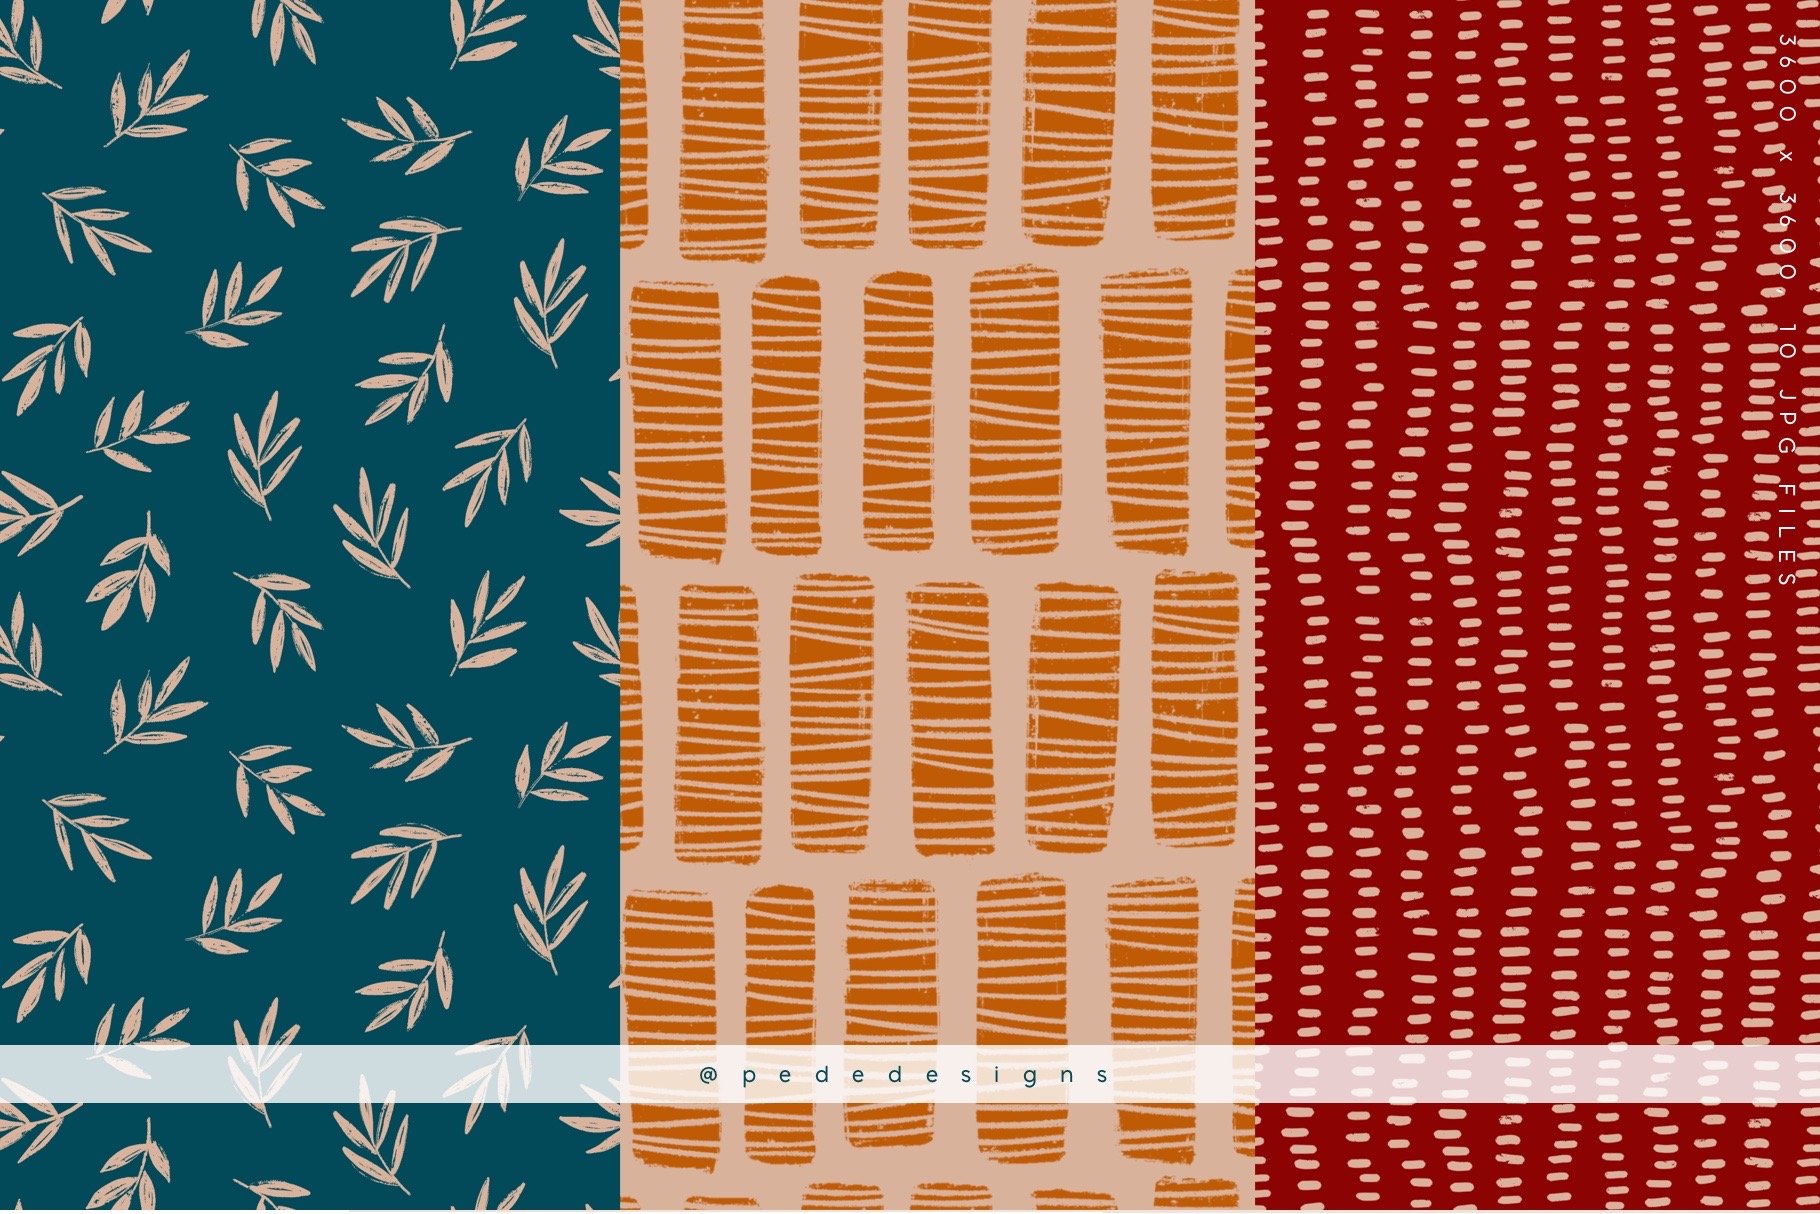 Green, orange and red backgrounds with abstract prints.